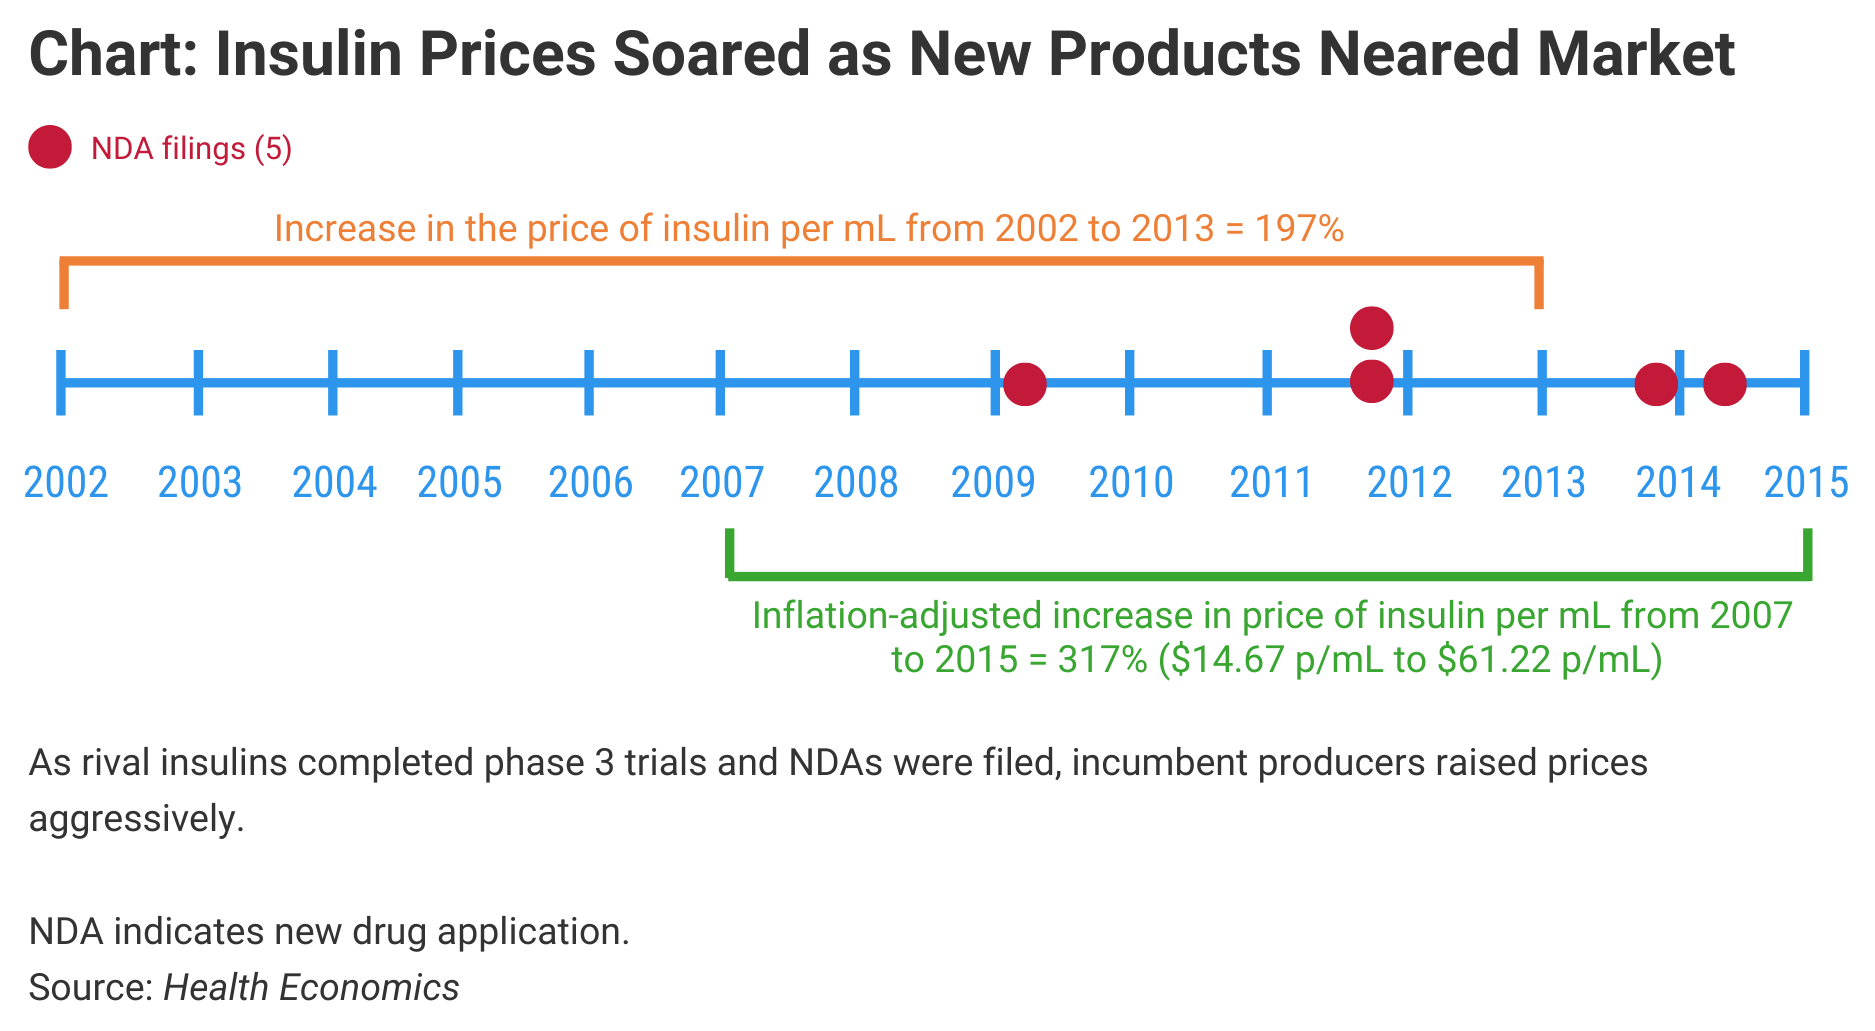 Chart: Insulin Prices Soared as New Products Neared Market